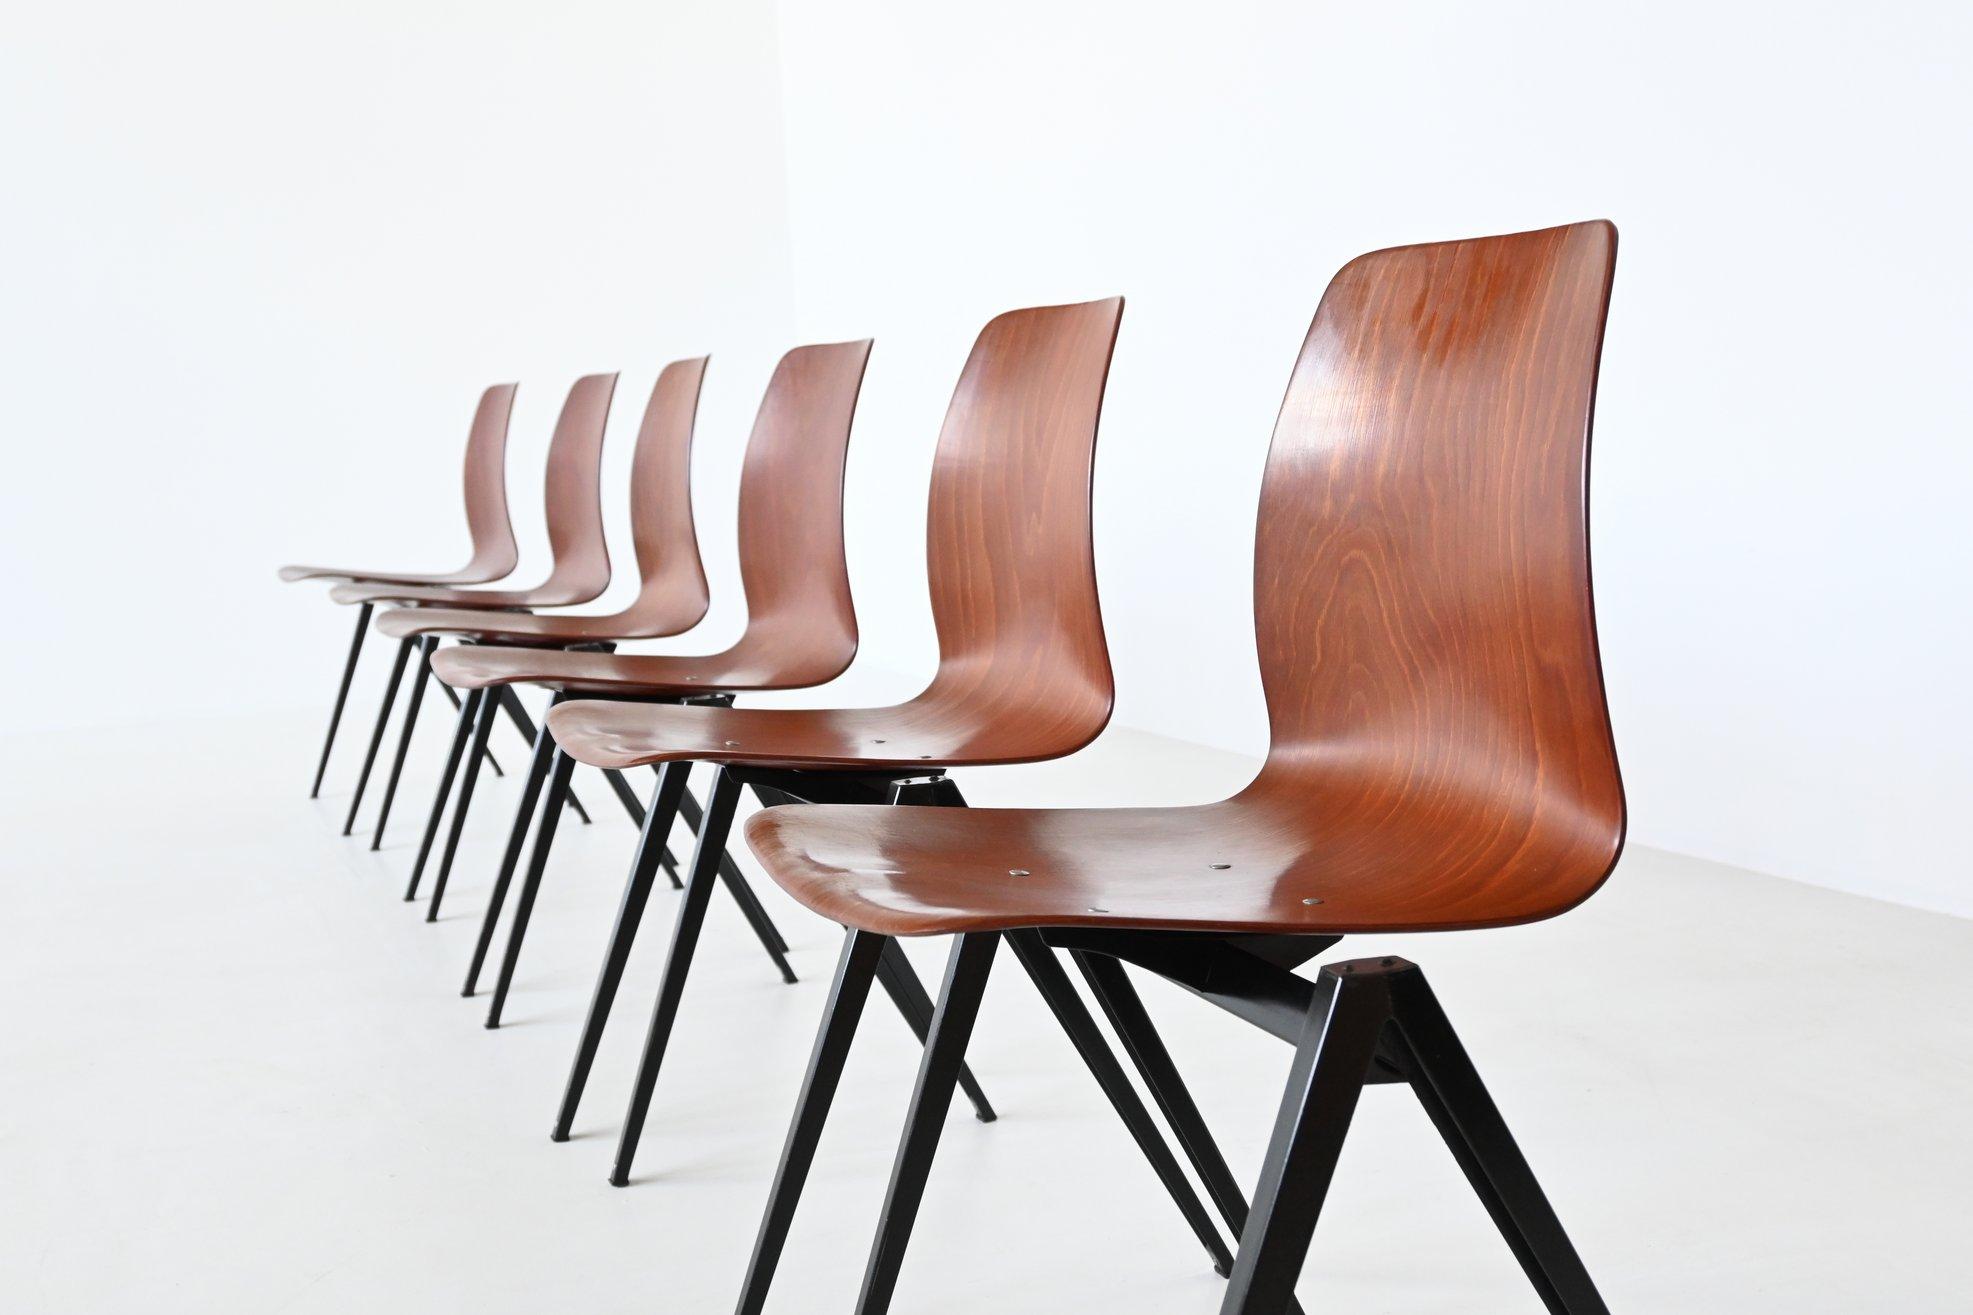 Large lot of 50 stacking chairs model S22 designed by Elmar Flototto and manufactured by Pagholz, Germany 1970. These chairs have black v-shaped metal frames and medium brown pressed wood seats. They have a nice patina from several years of usage,